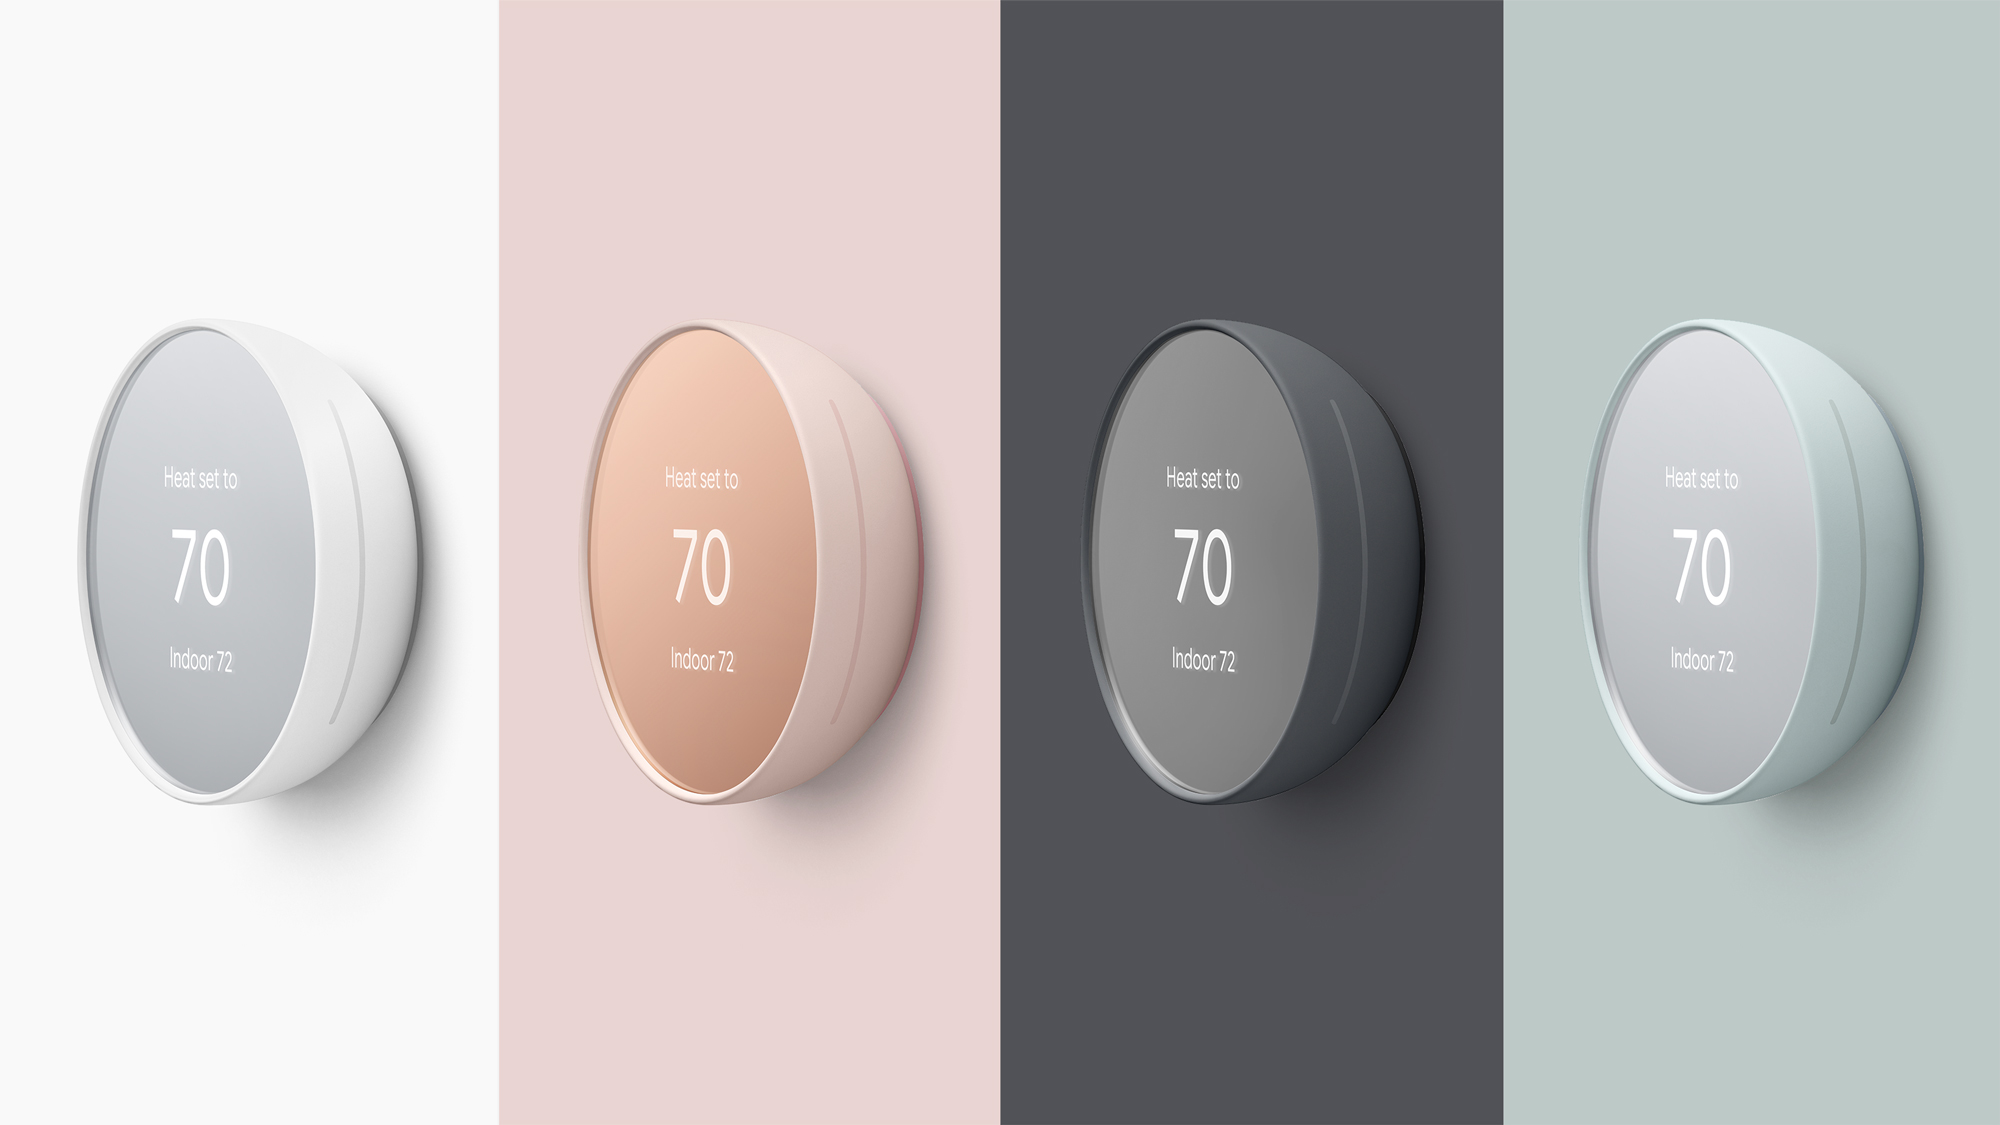 Colour options for the new Nest Thermostat include snow, sand, charcoal, and fog — which most of us refer to as green. (Image: Nest)